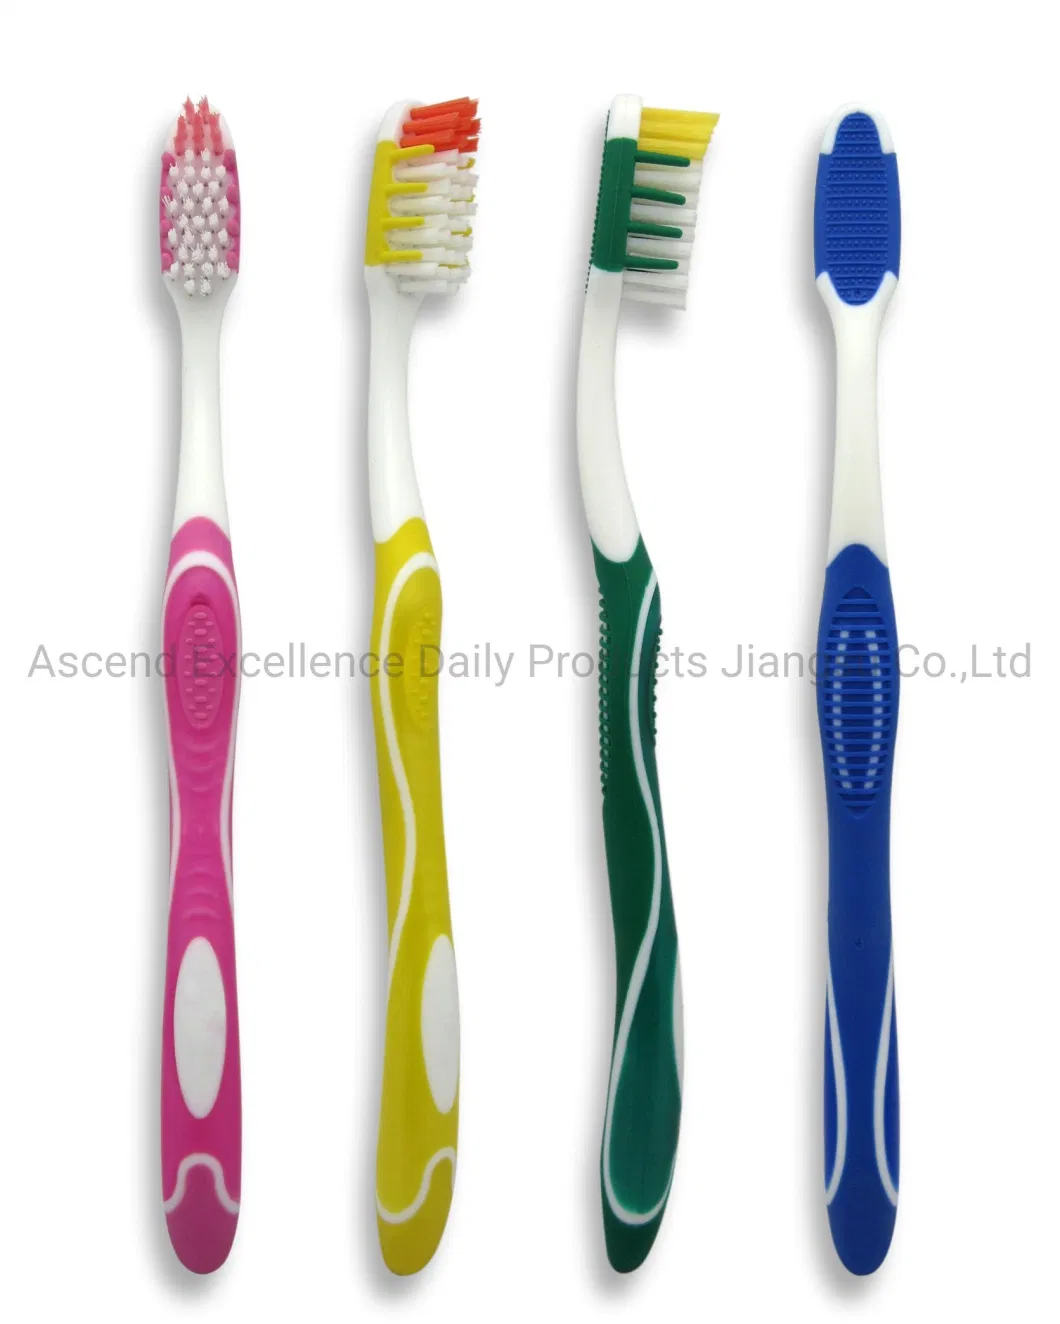 Personalized Grown-up Dental Care Brush with Gum Soothing and Tongue Refreshment